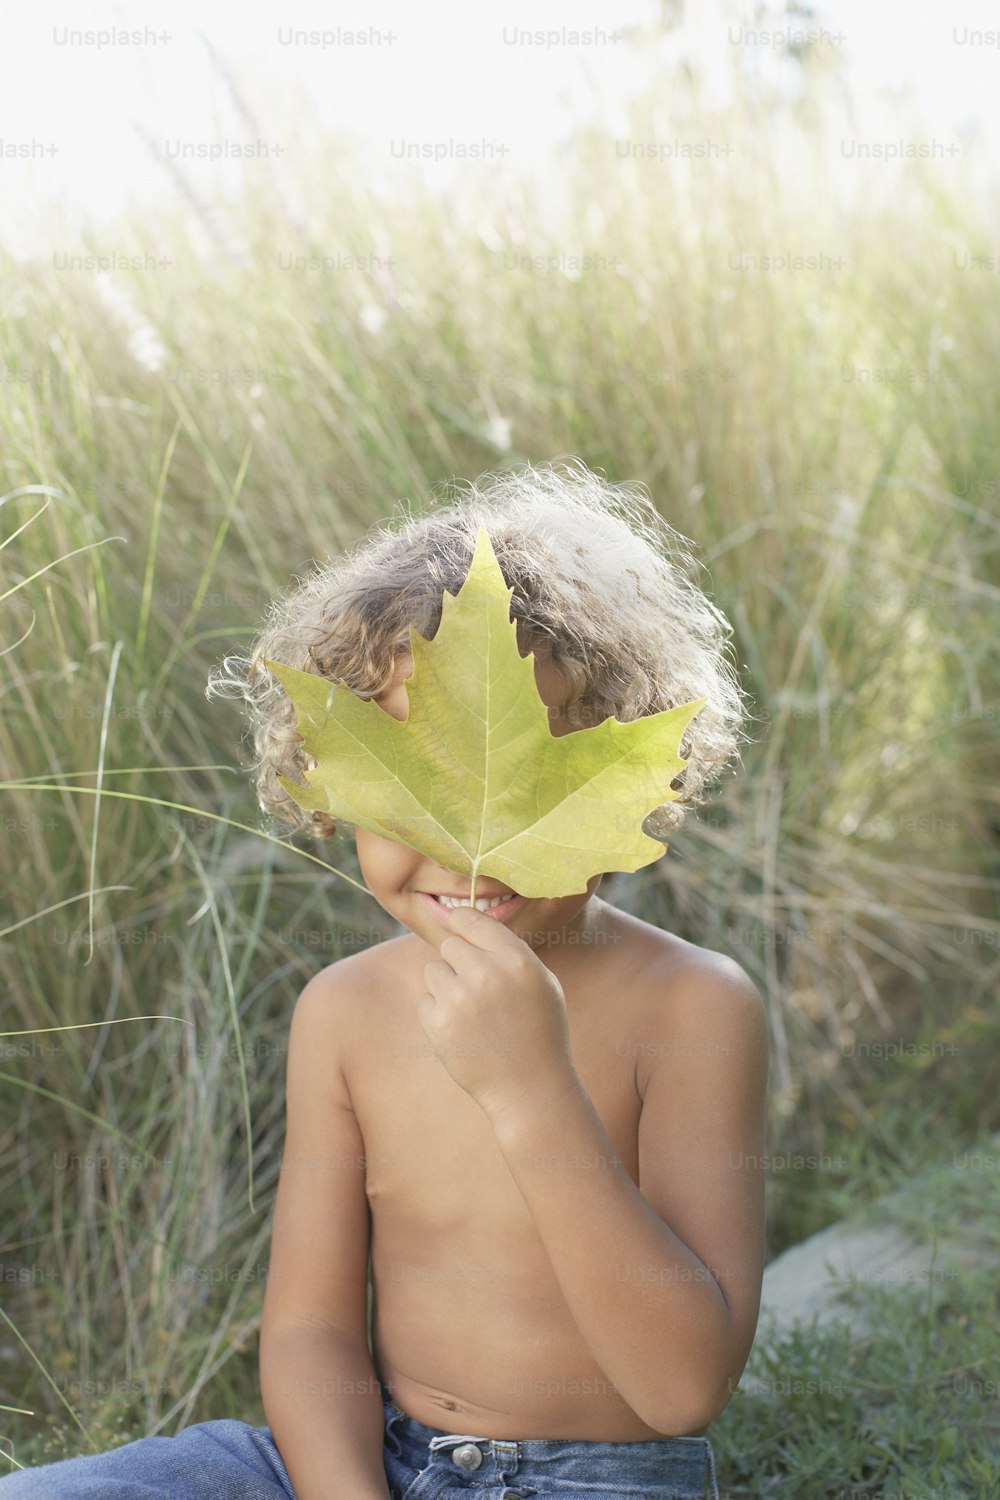 a young boy holding a leaf over his face